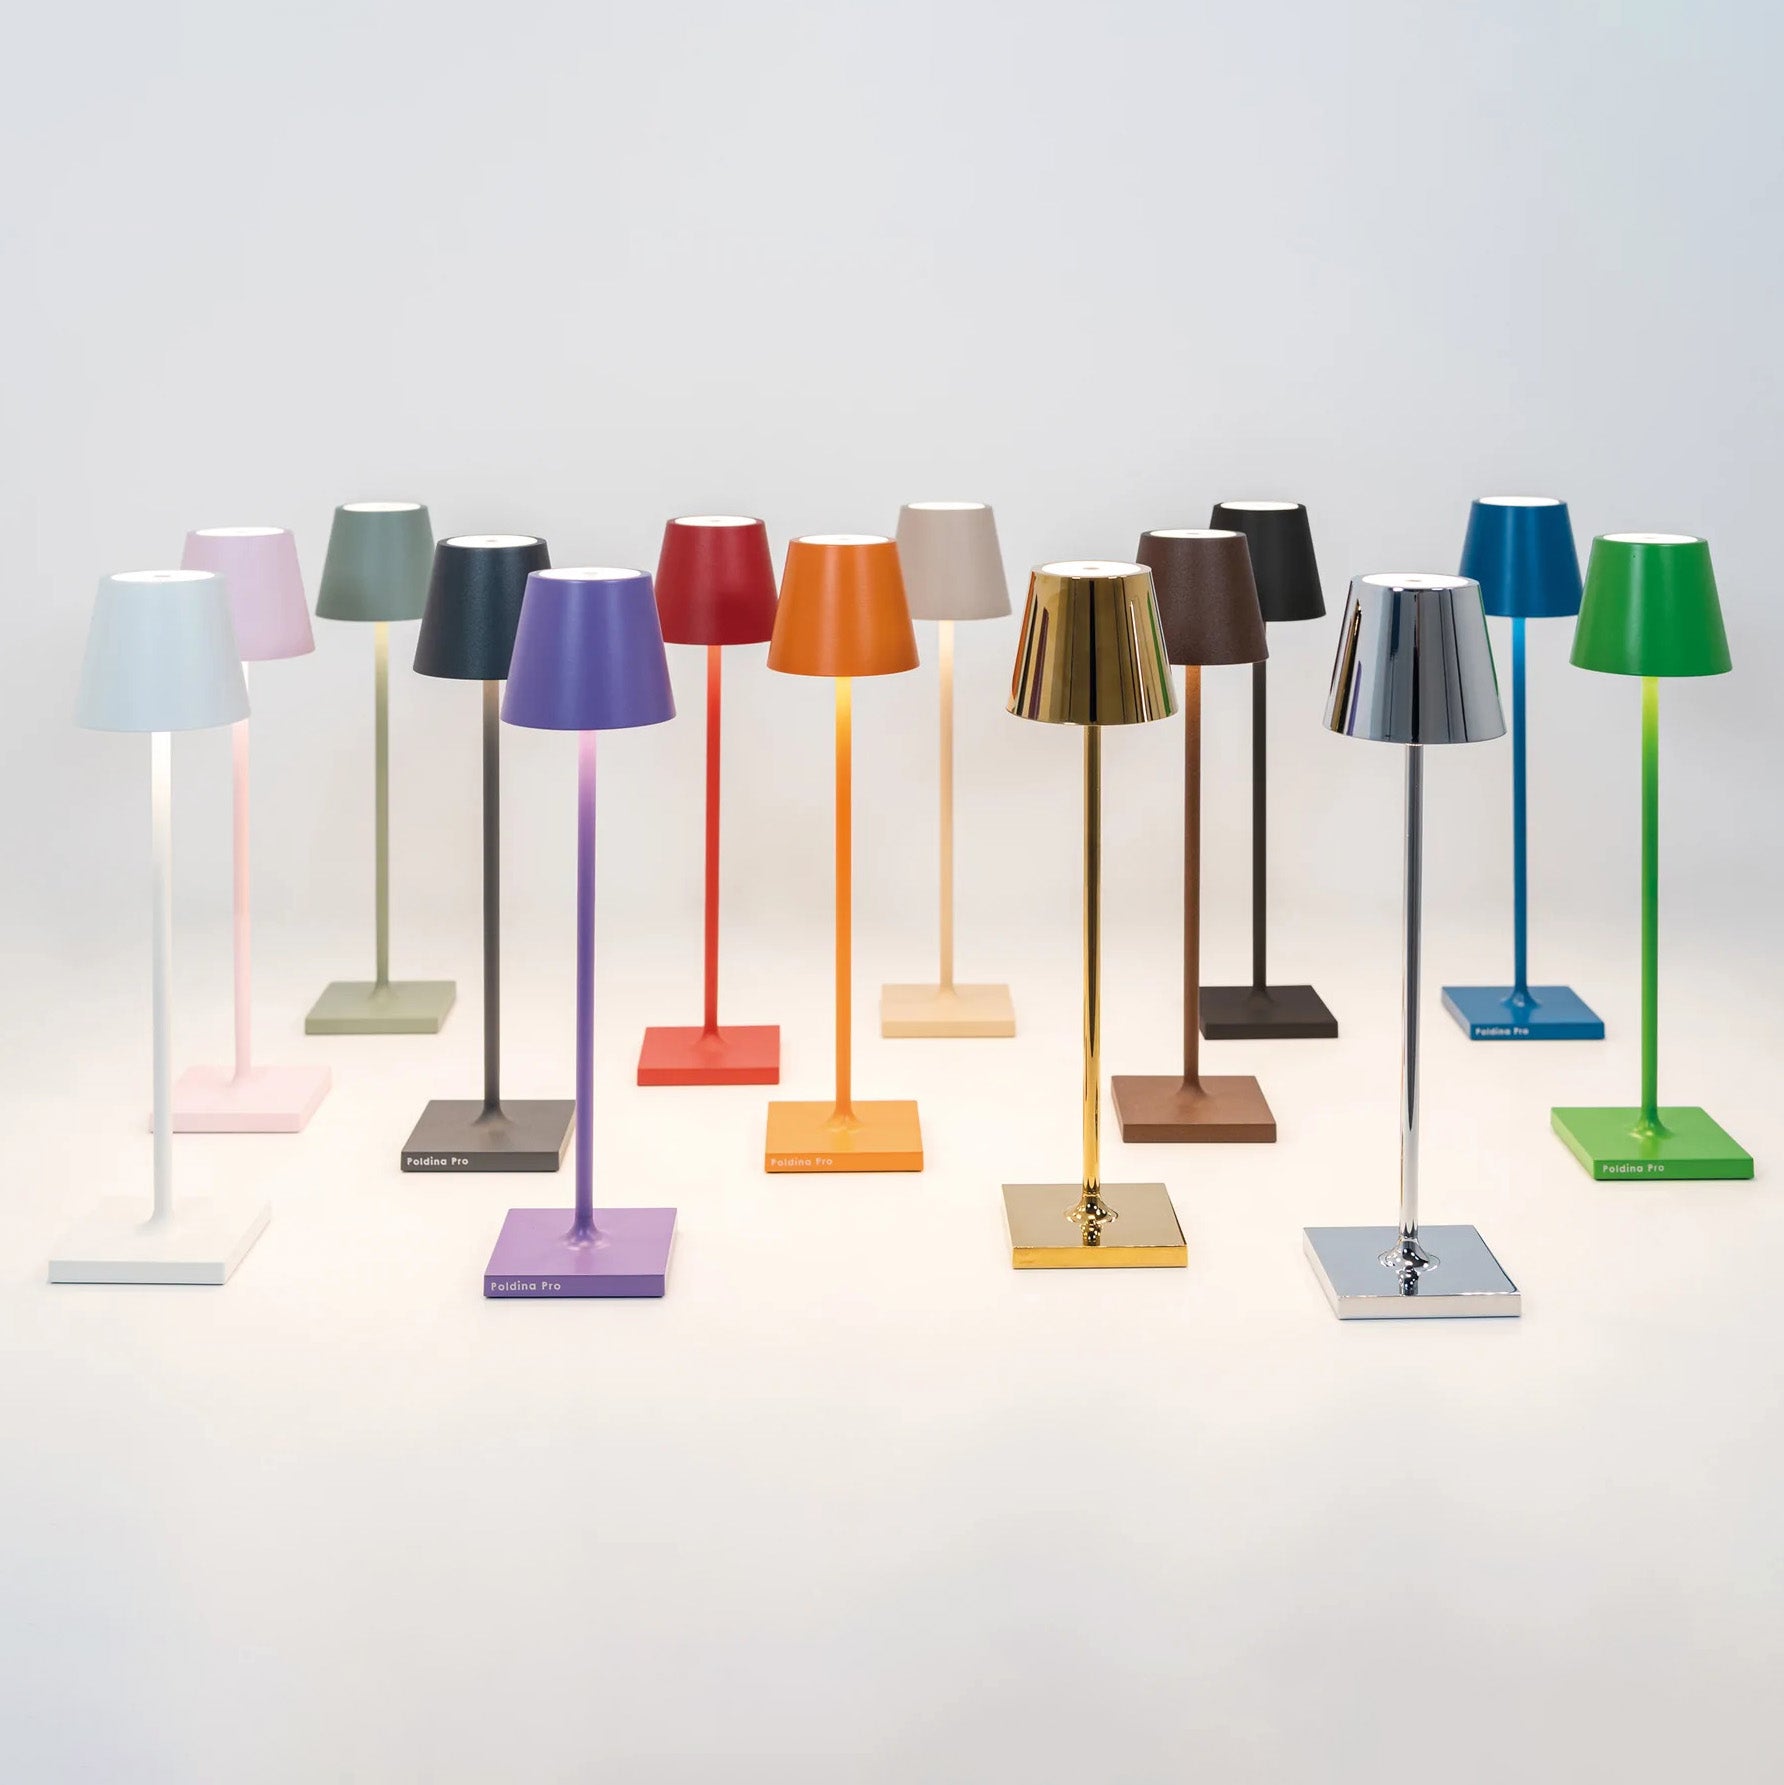 Lampe de table LED tactile nude The Home Deco Factory